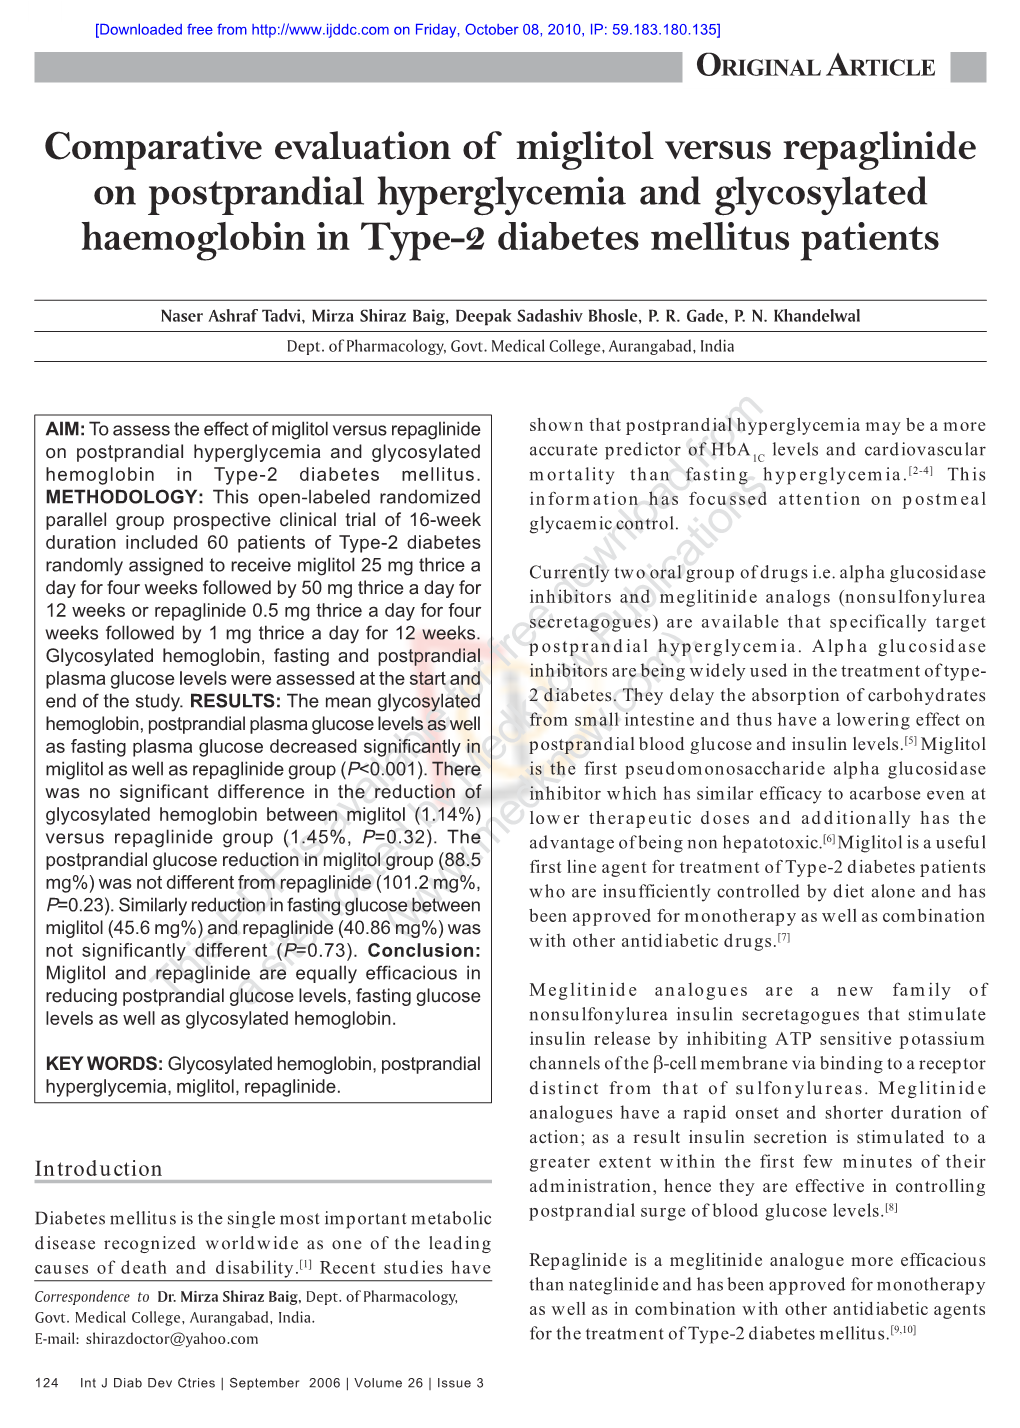 Comparative Evaluation of Miglitol Versus Repaglinide on Postprandial Hyperglycemia and Glycosylated Haemoglobin in Type-2 Diabetes Mellitus Patients